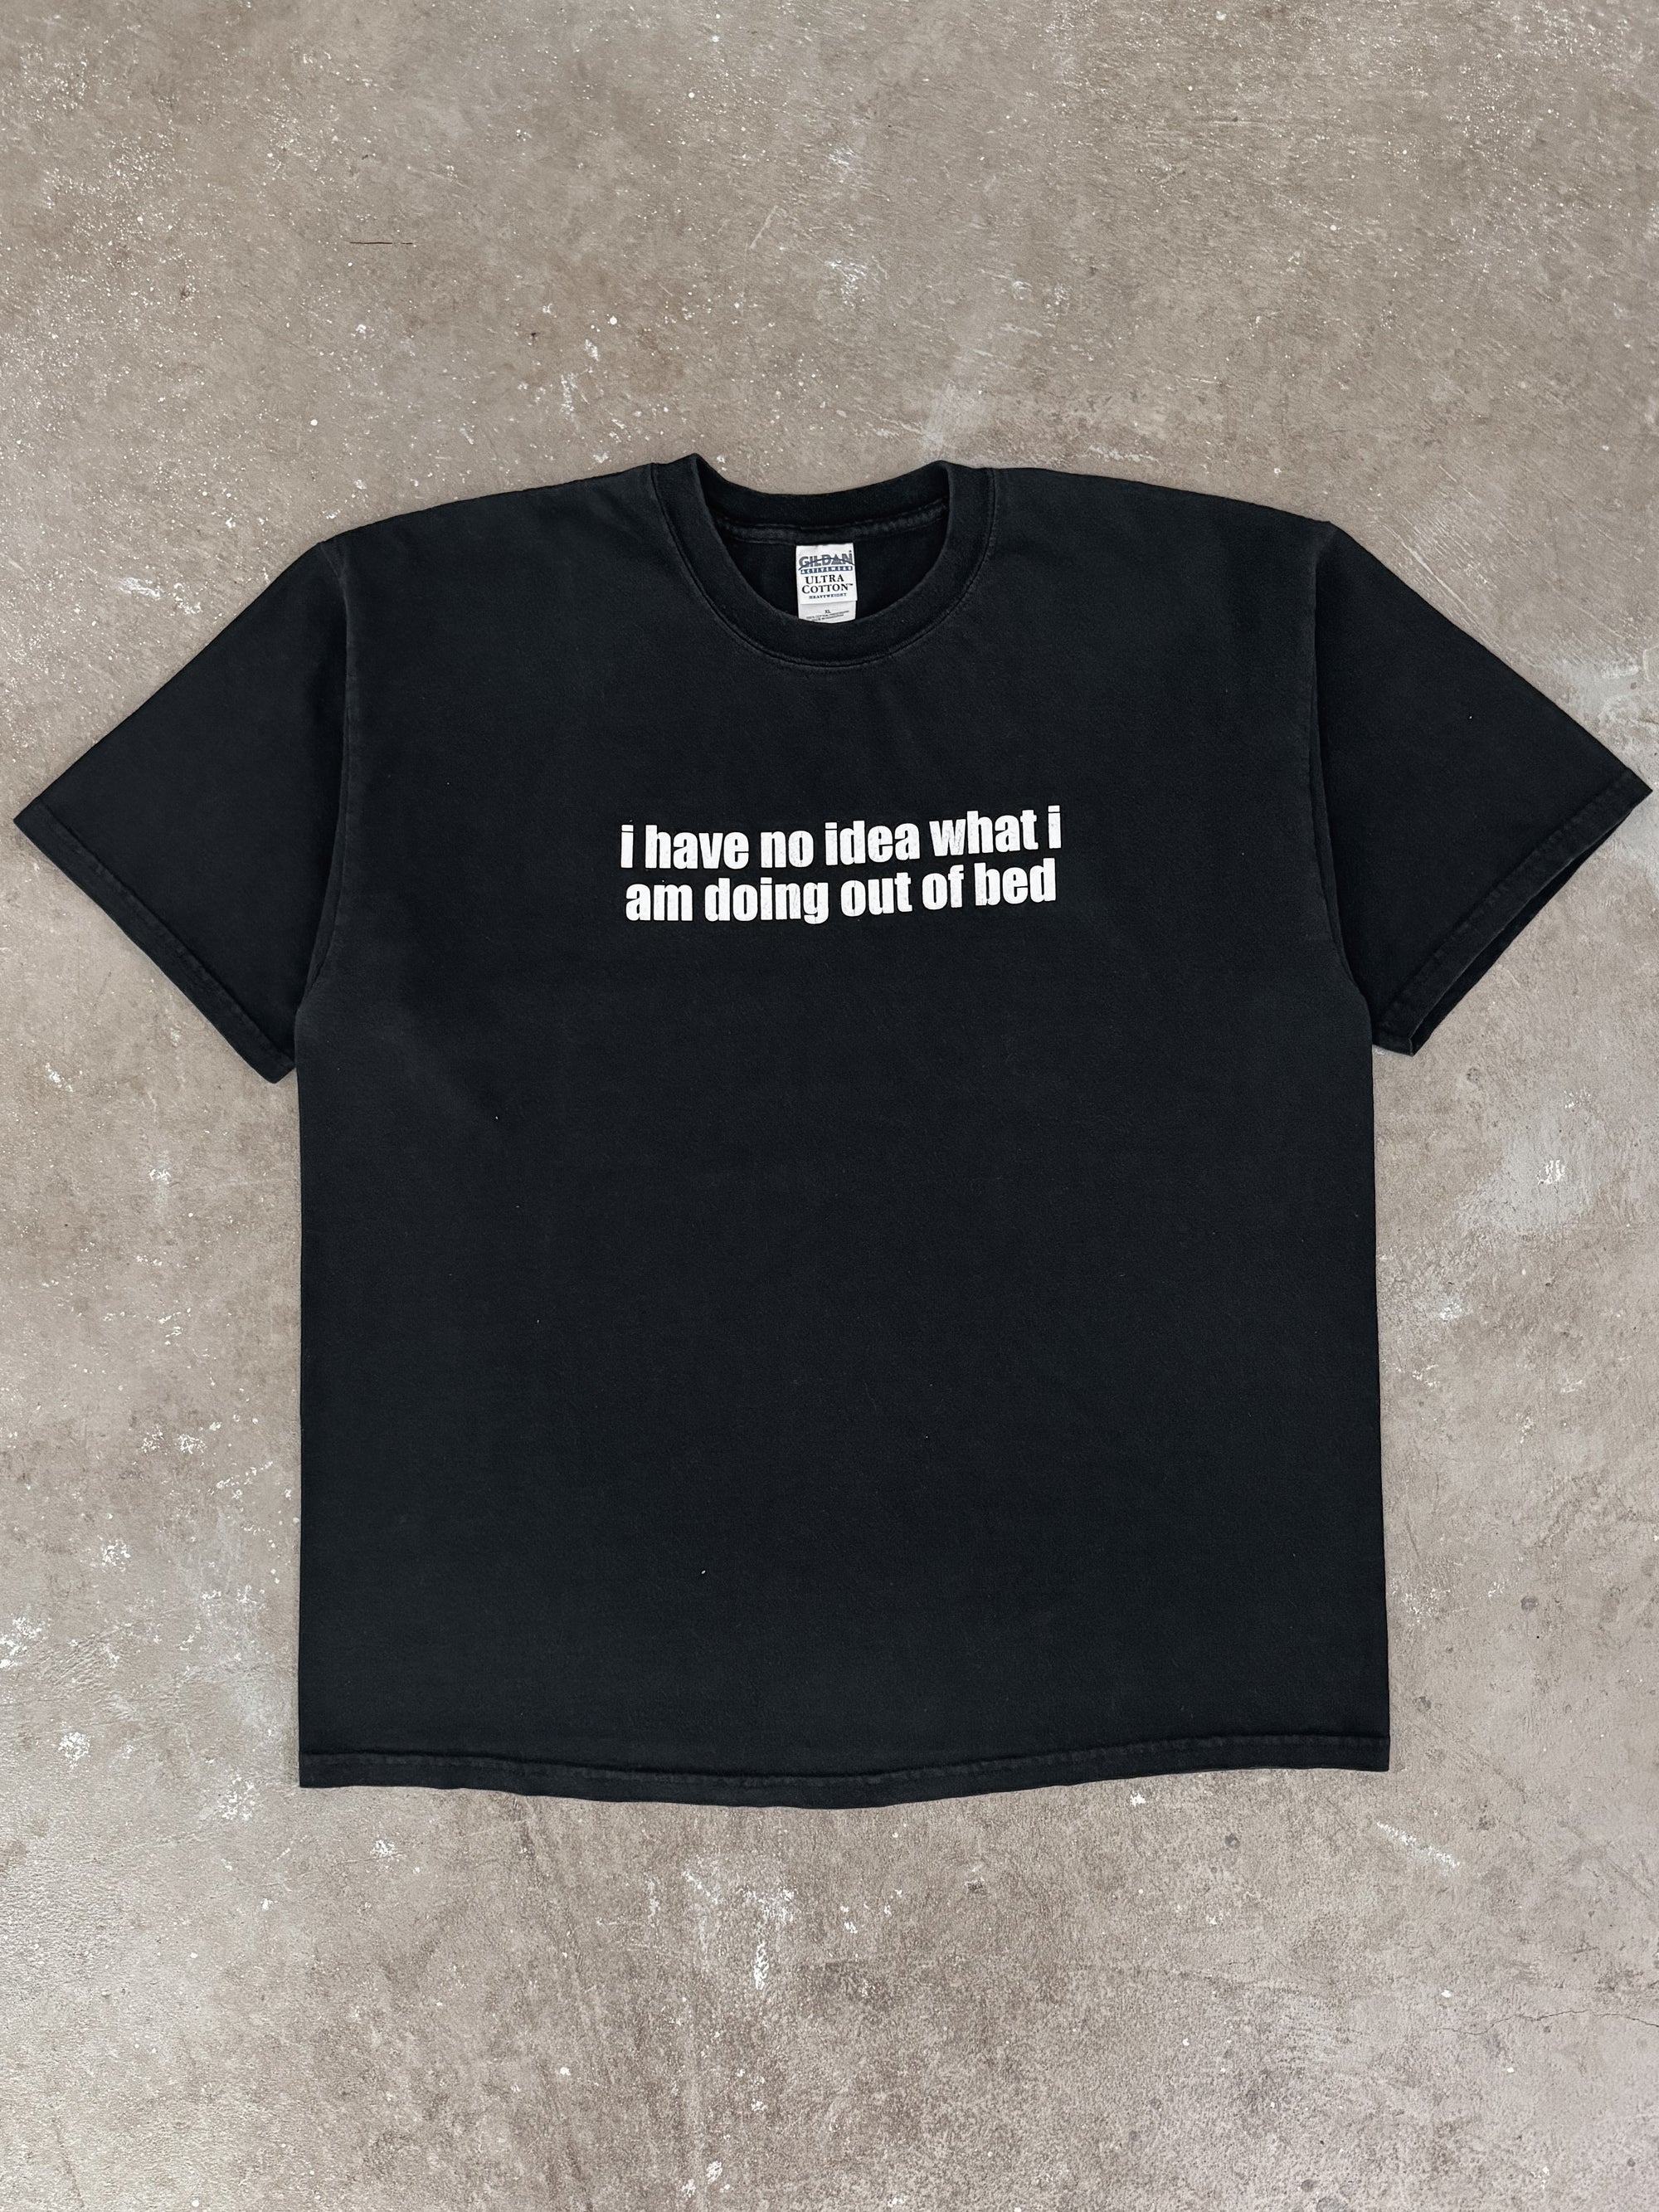 2000s “I Have No Idea What I Am Doing Out Of Bed” Tee (XL)